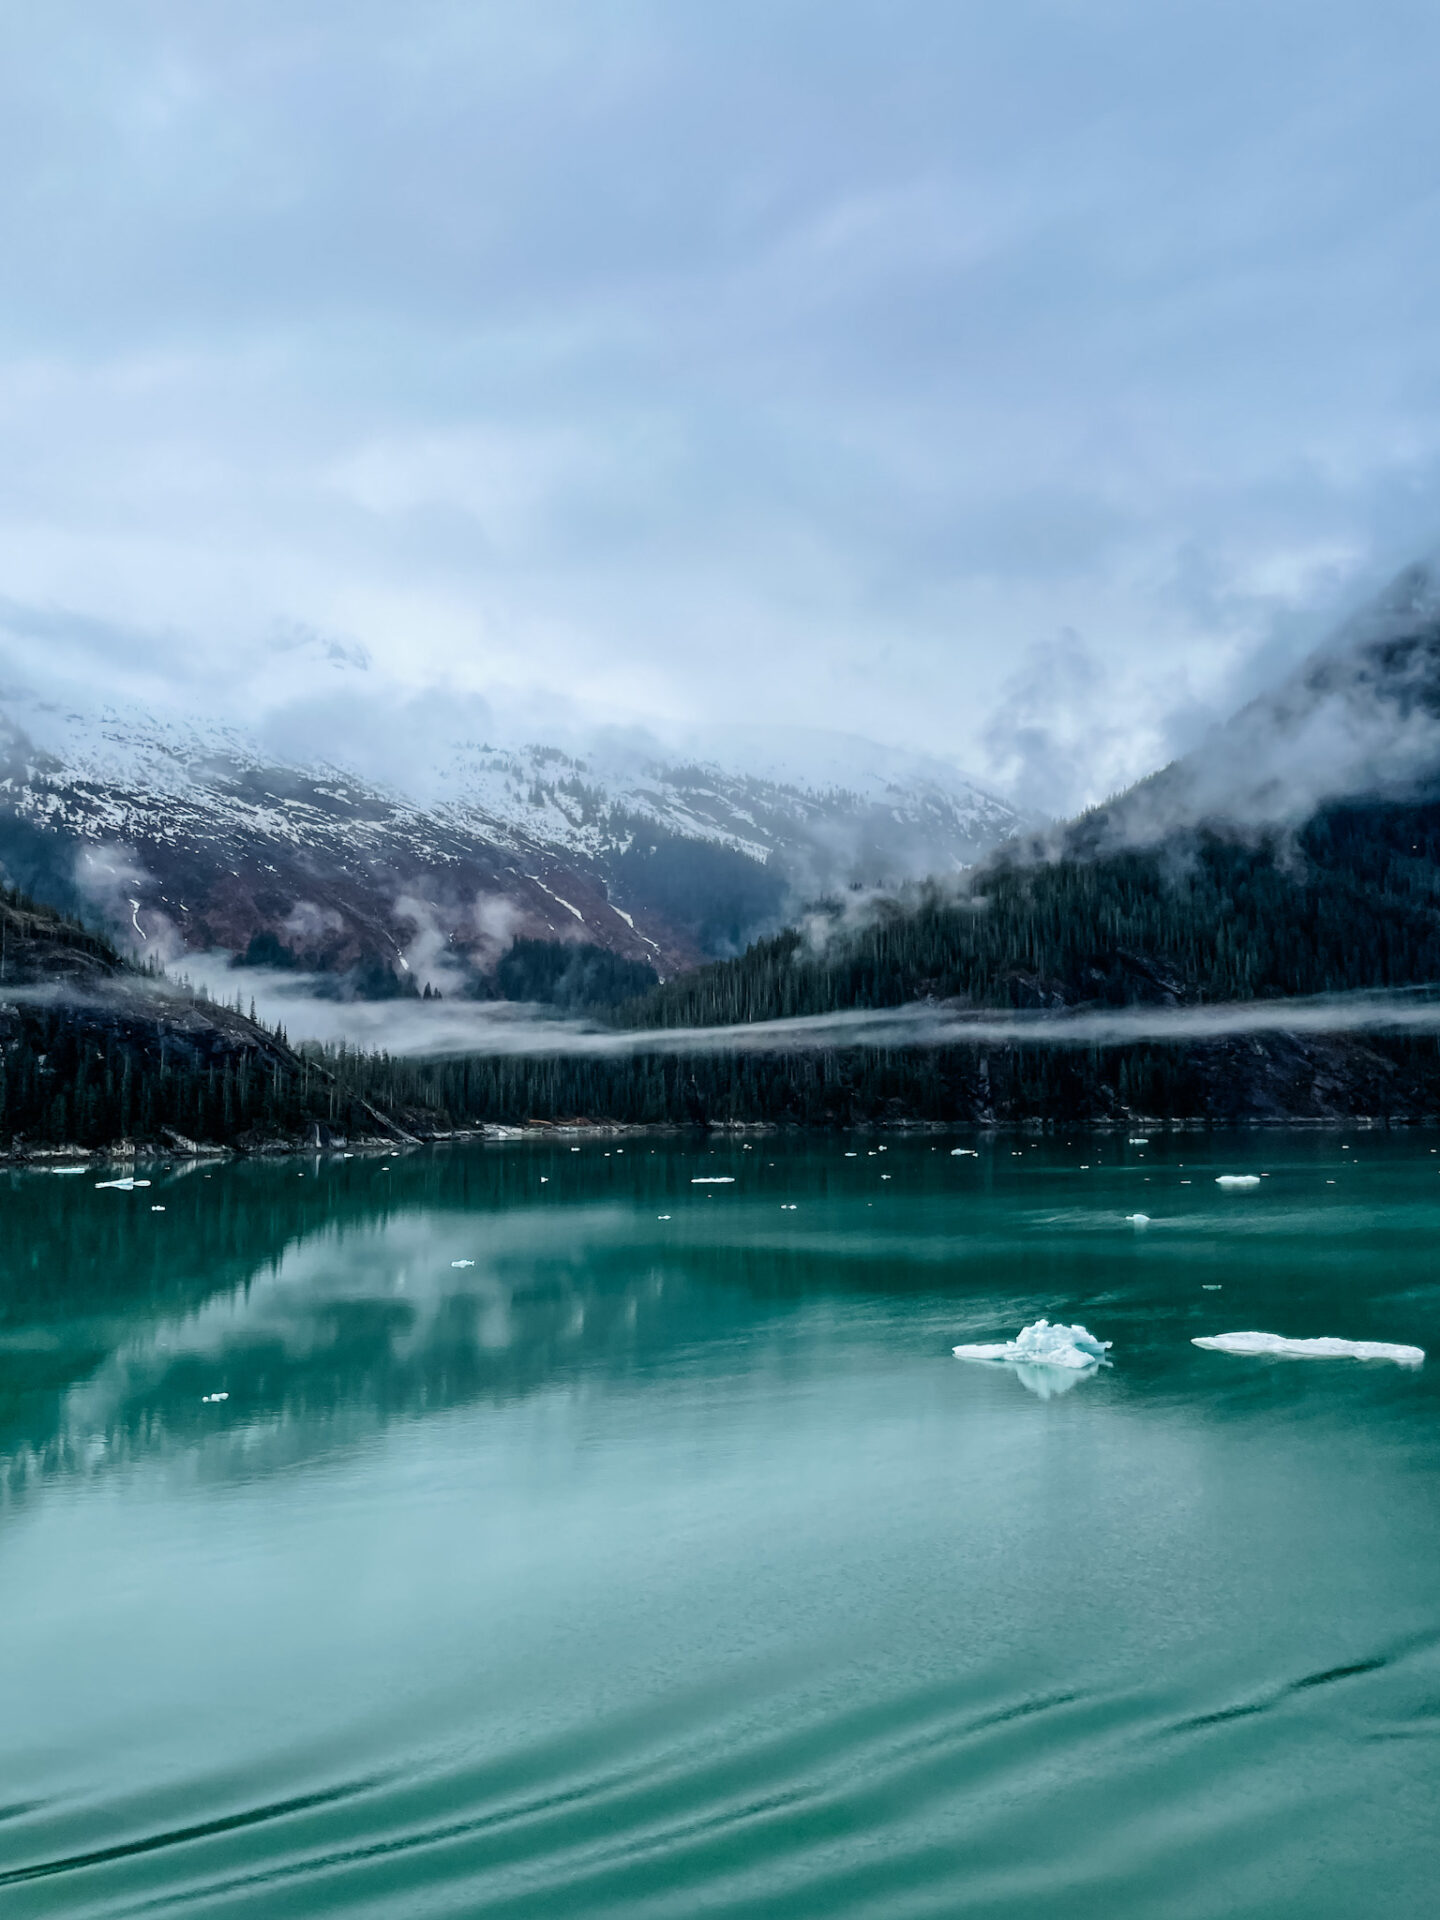 Quick Tips To Make The Most Of Your Time On An Alaskan Cruise